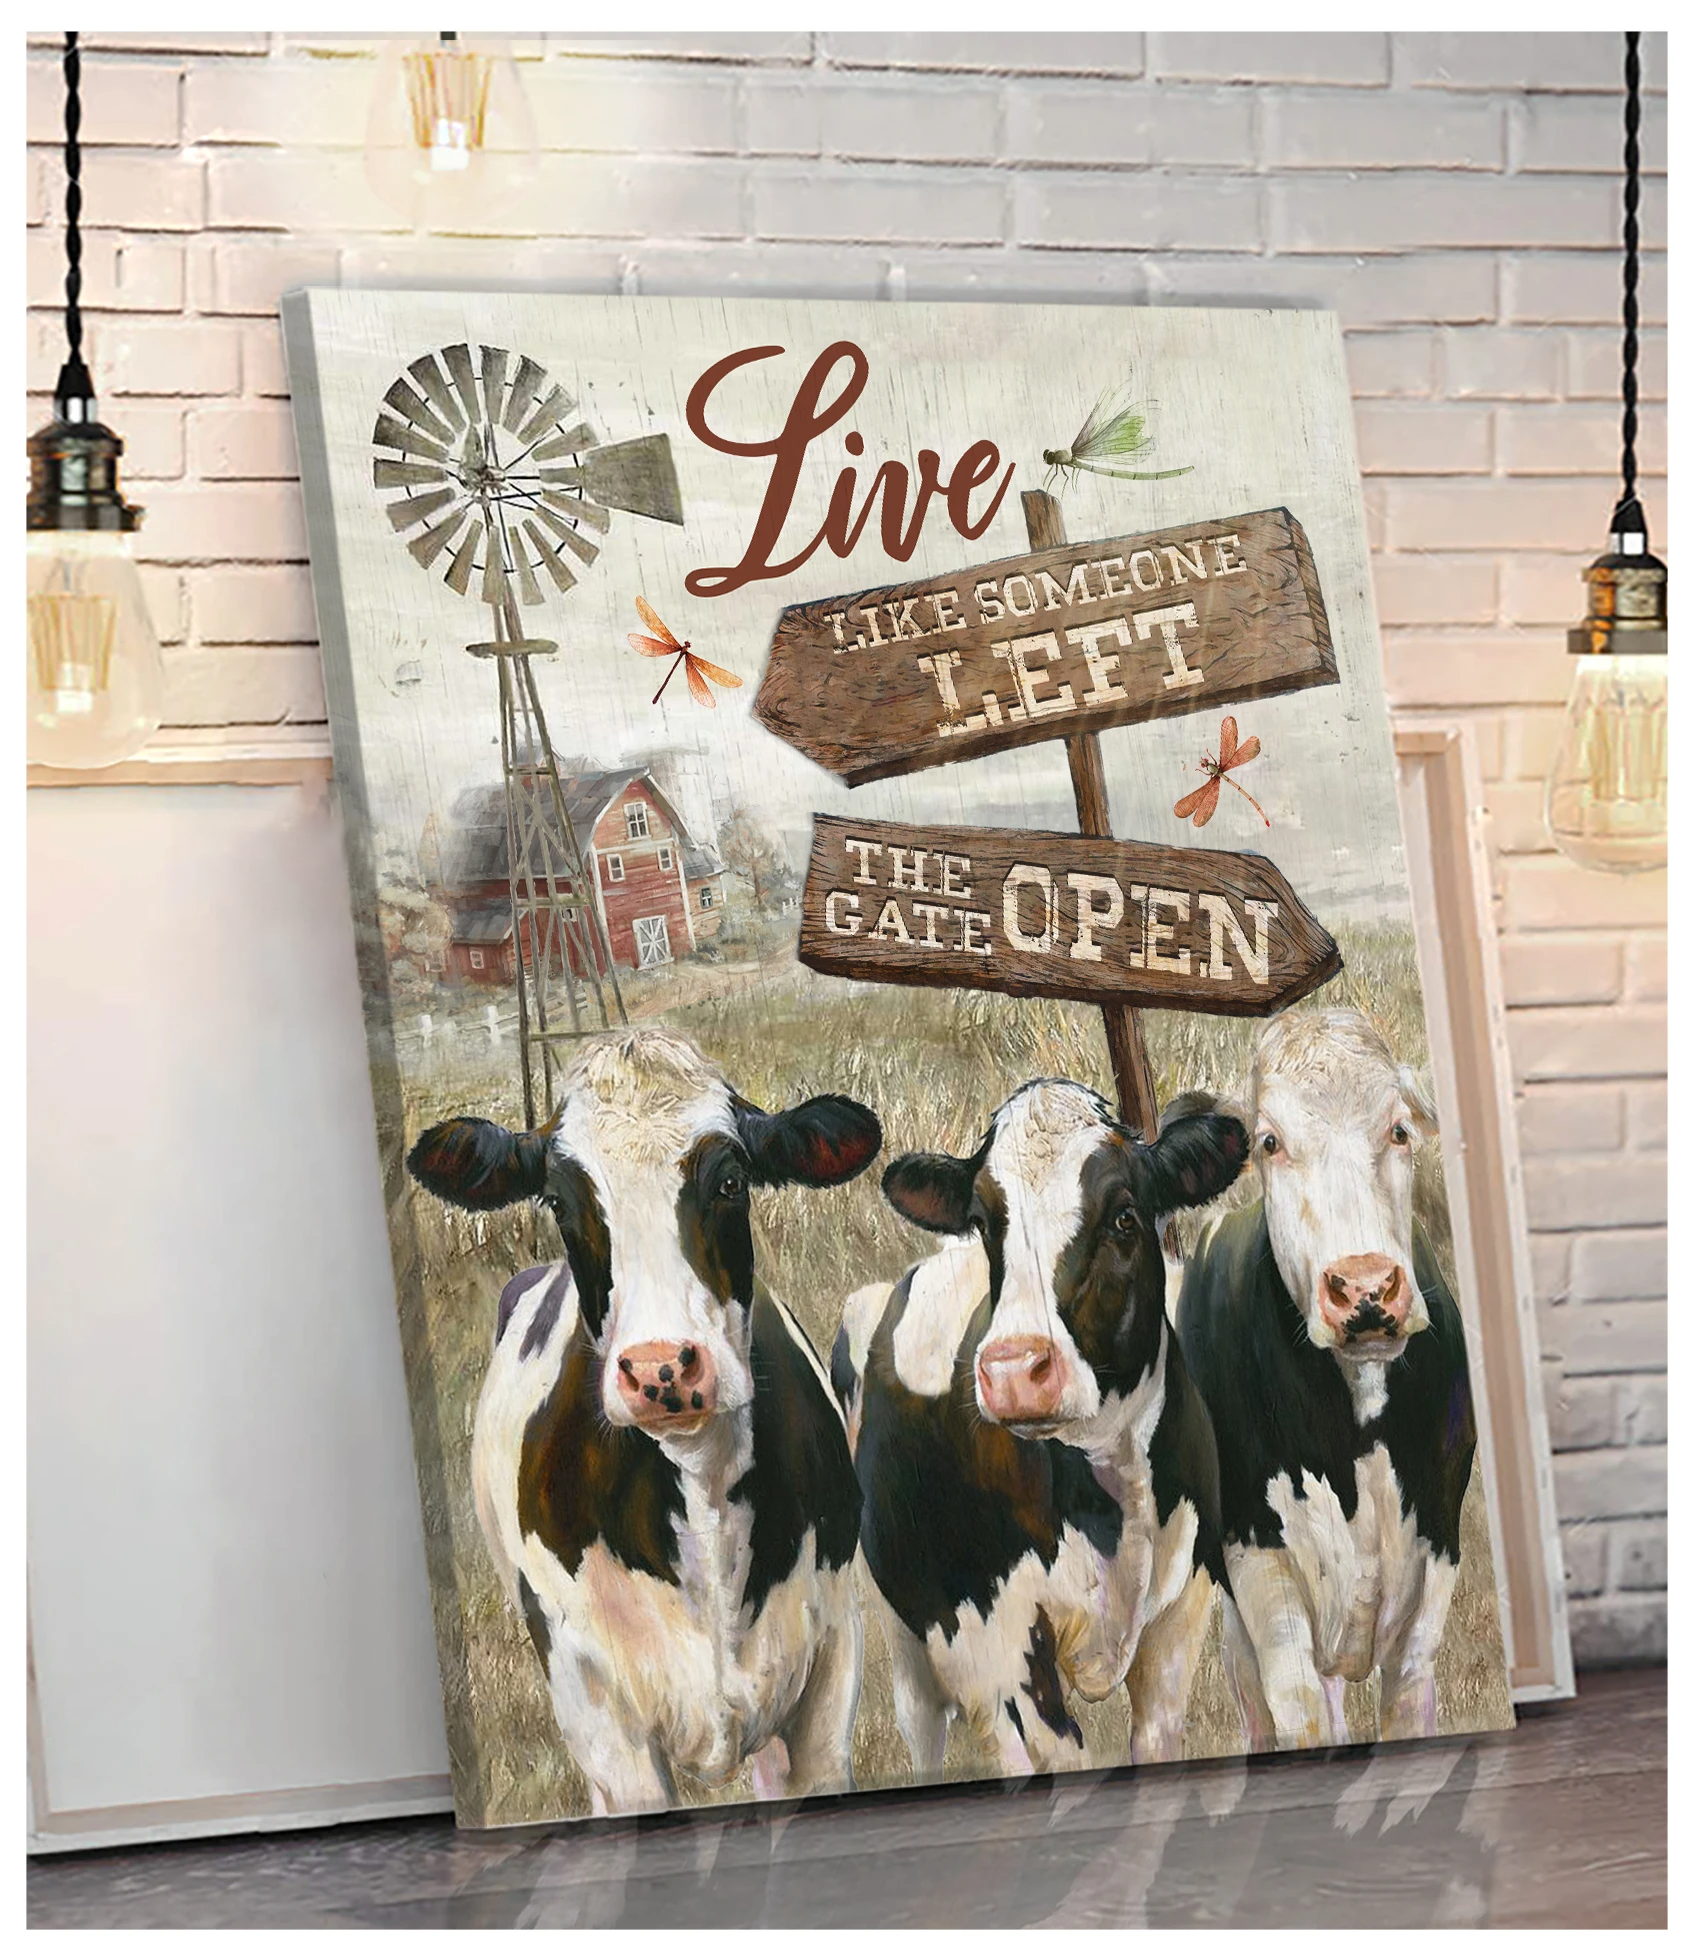 Charming Holstein Cattle Canvases Live Like Someone Left The Gate Open Hanging Wall Art Decor Idea F